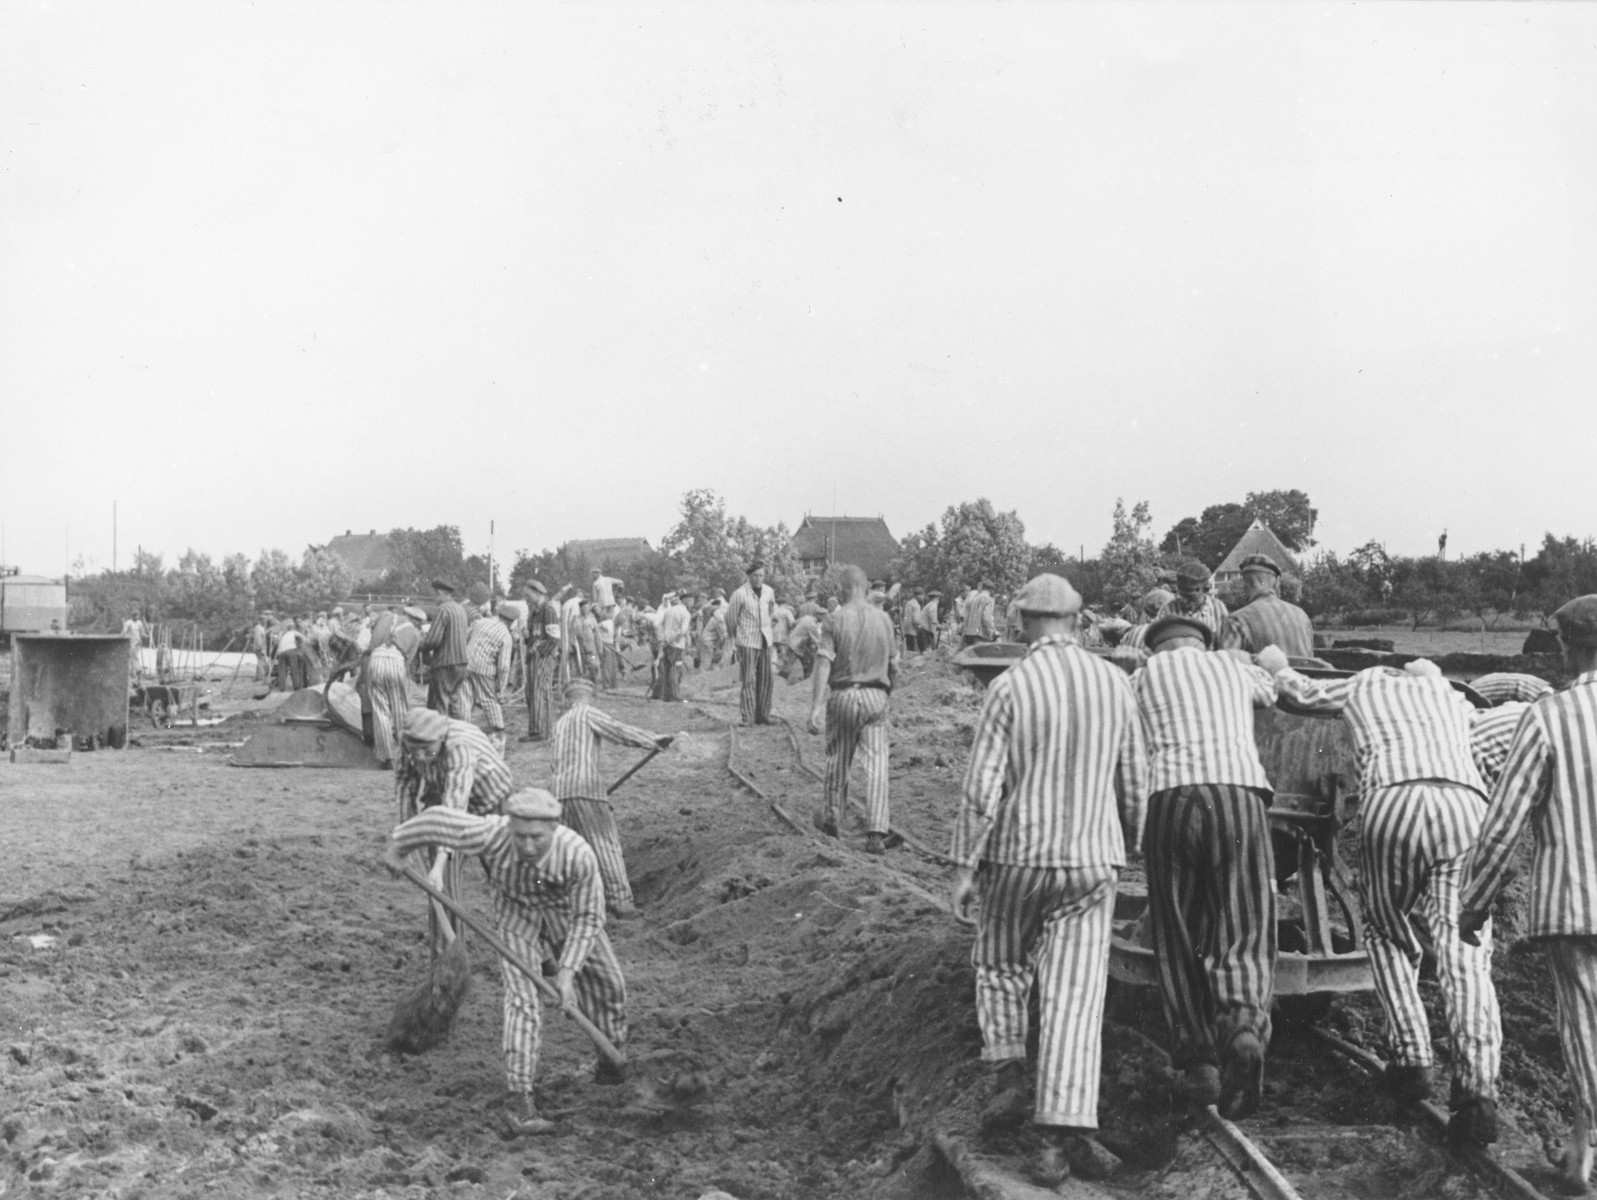 Prisoners at forced labor building the Dove-Elbe canal. The Kapos wear white and black armbands.

Pictured at the front, left facing the camera and digging with a shovel, is Salo Blechner.